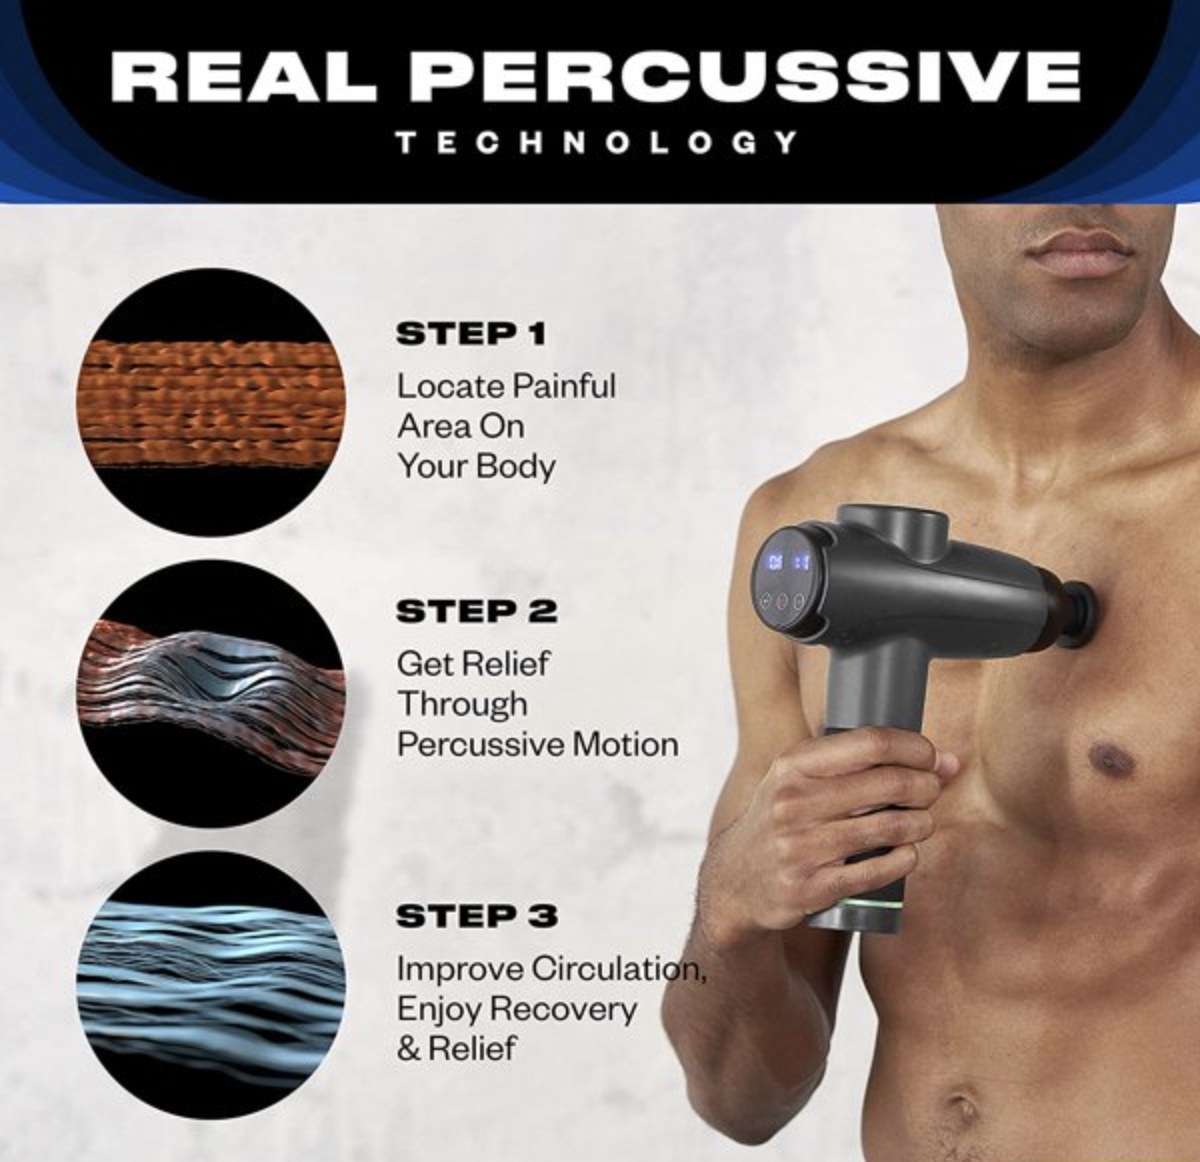 Someone using the massage gun on chest with diagram outlining three steps: 1, locate painful area on body, 2, get relief through percussive motion, and 3, improve circulation, enjoy recovery and relief